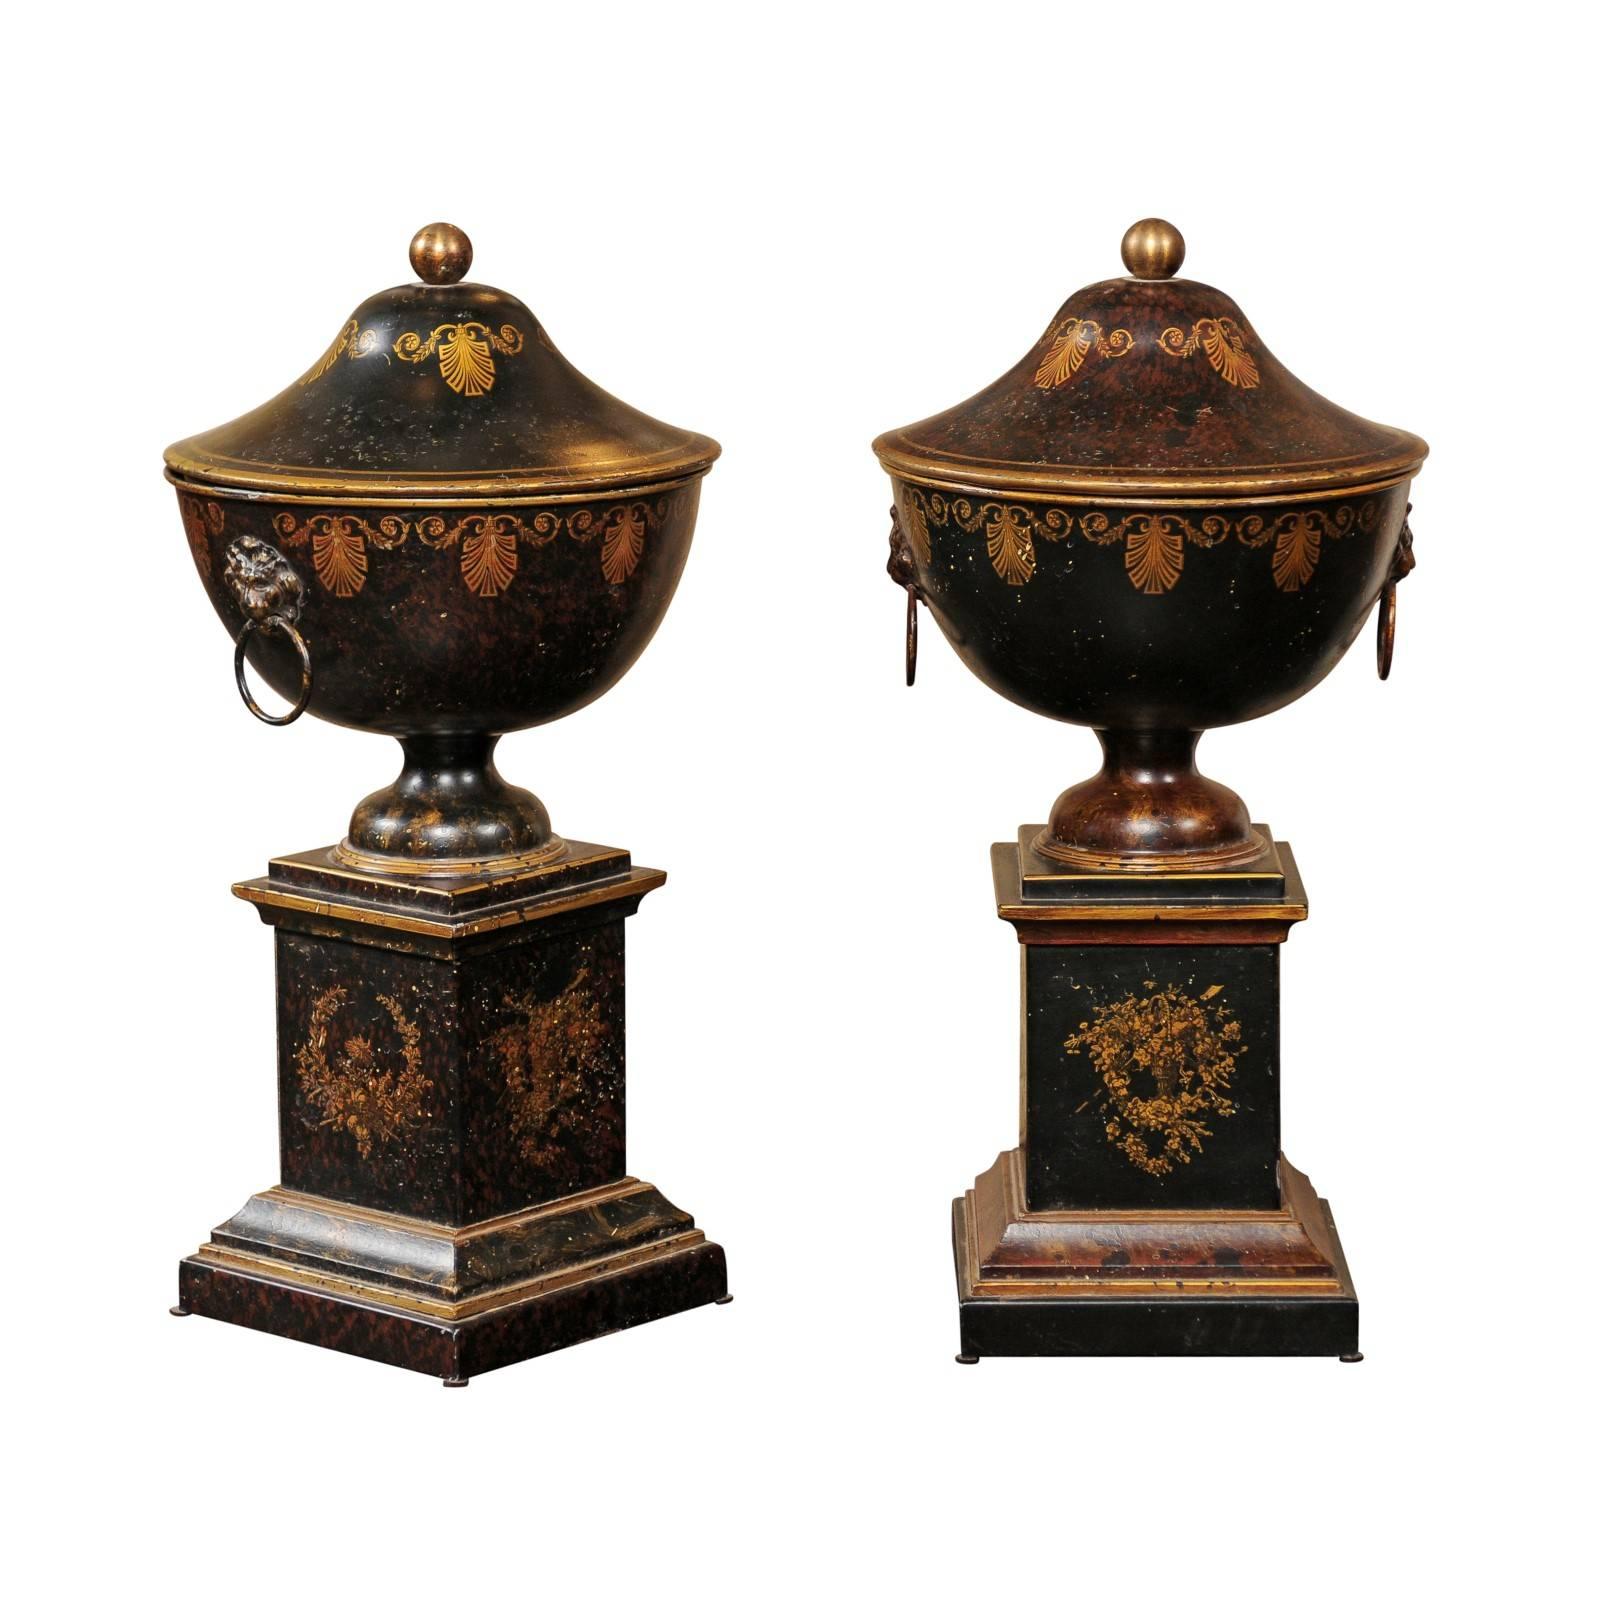 Pair of French 1920s Tole Black Tole Urns on Pedestals with Gilded Accents